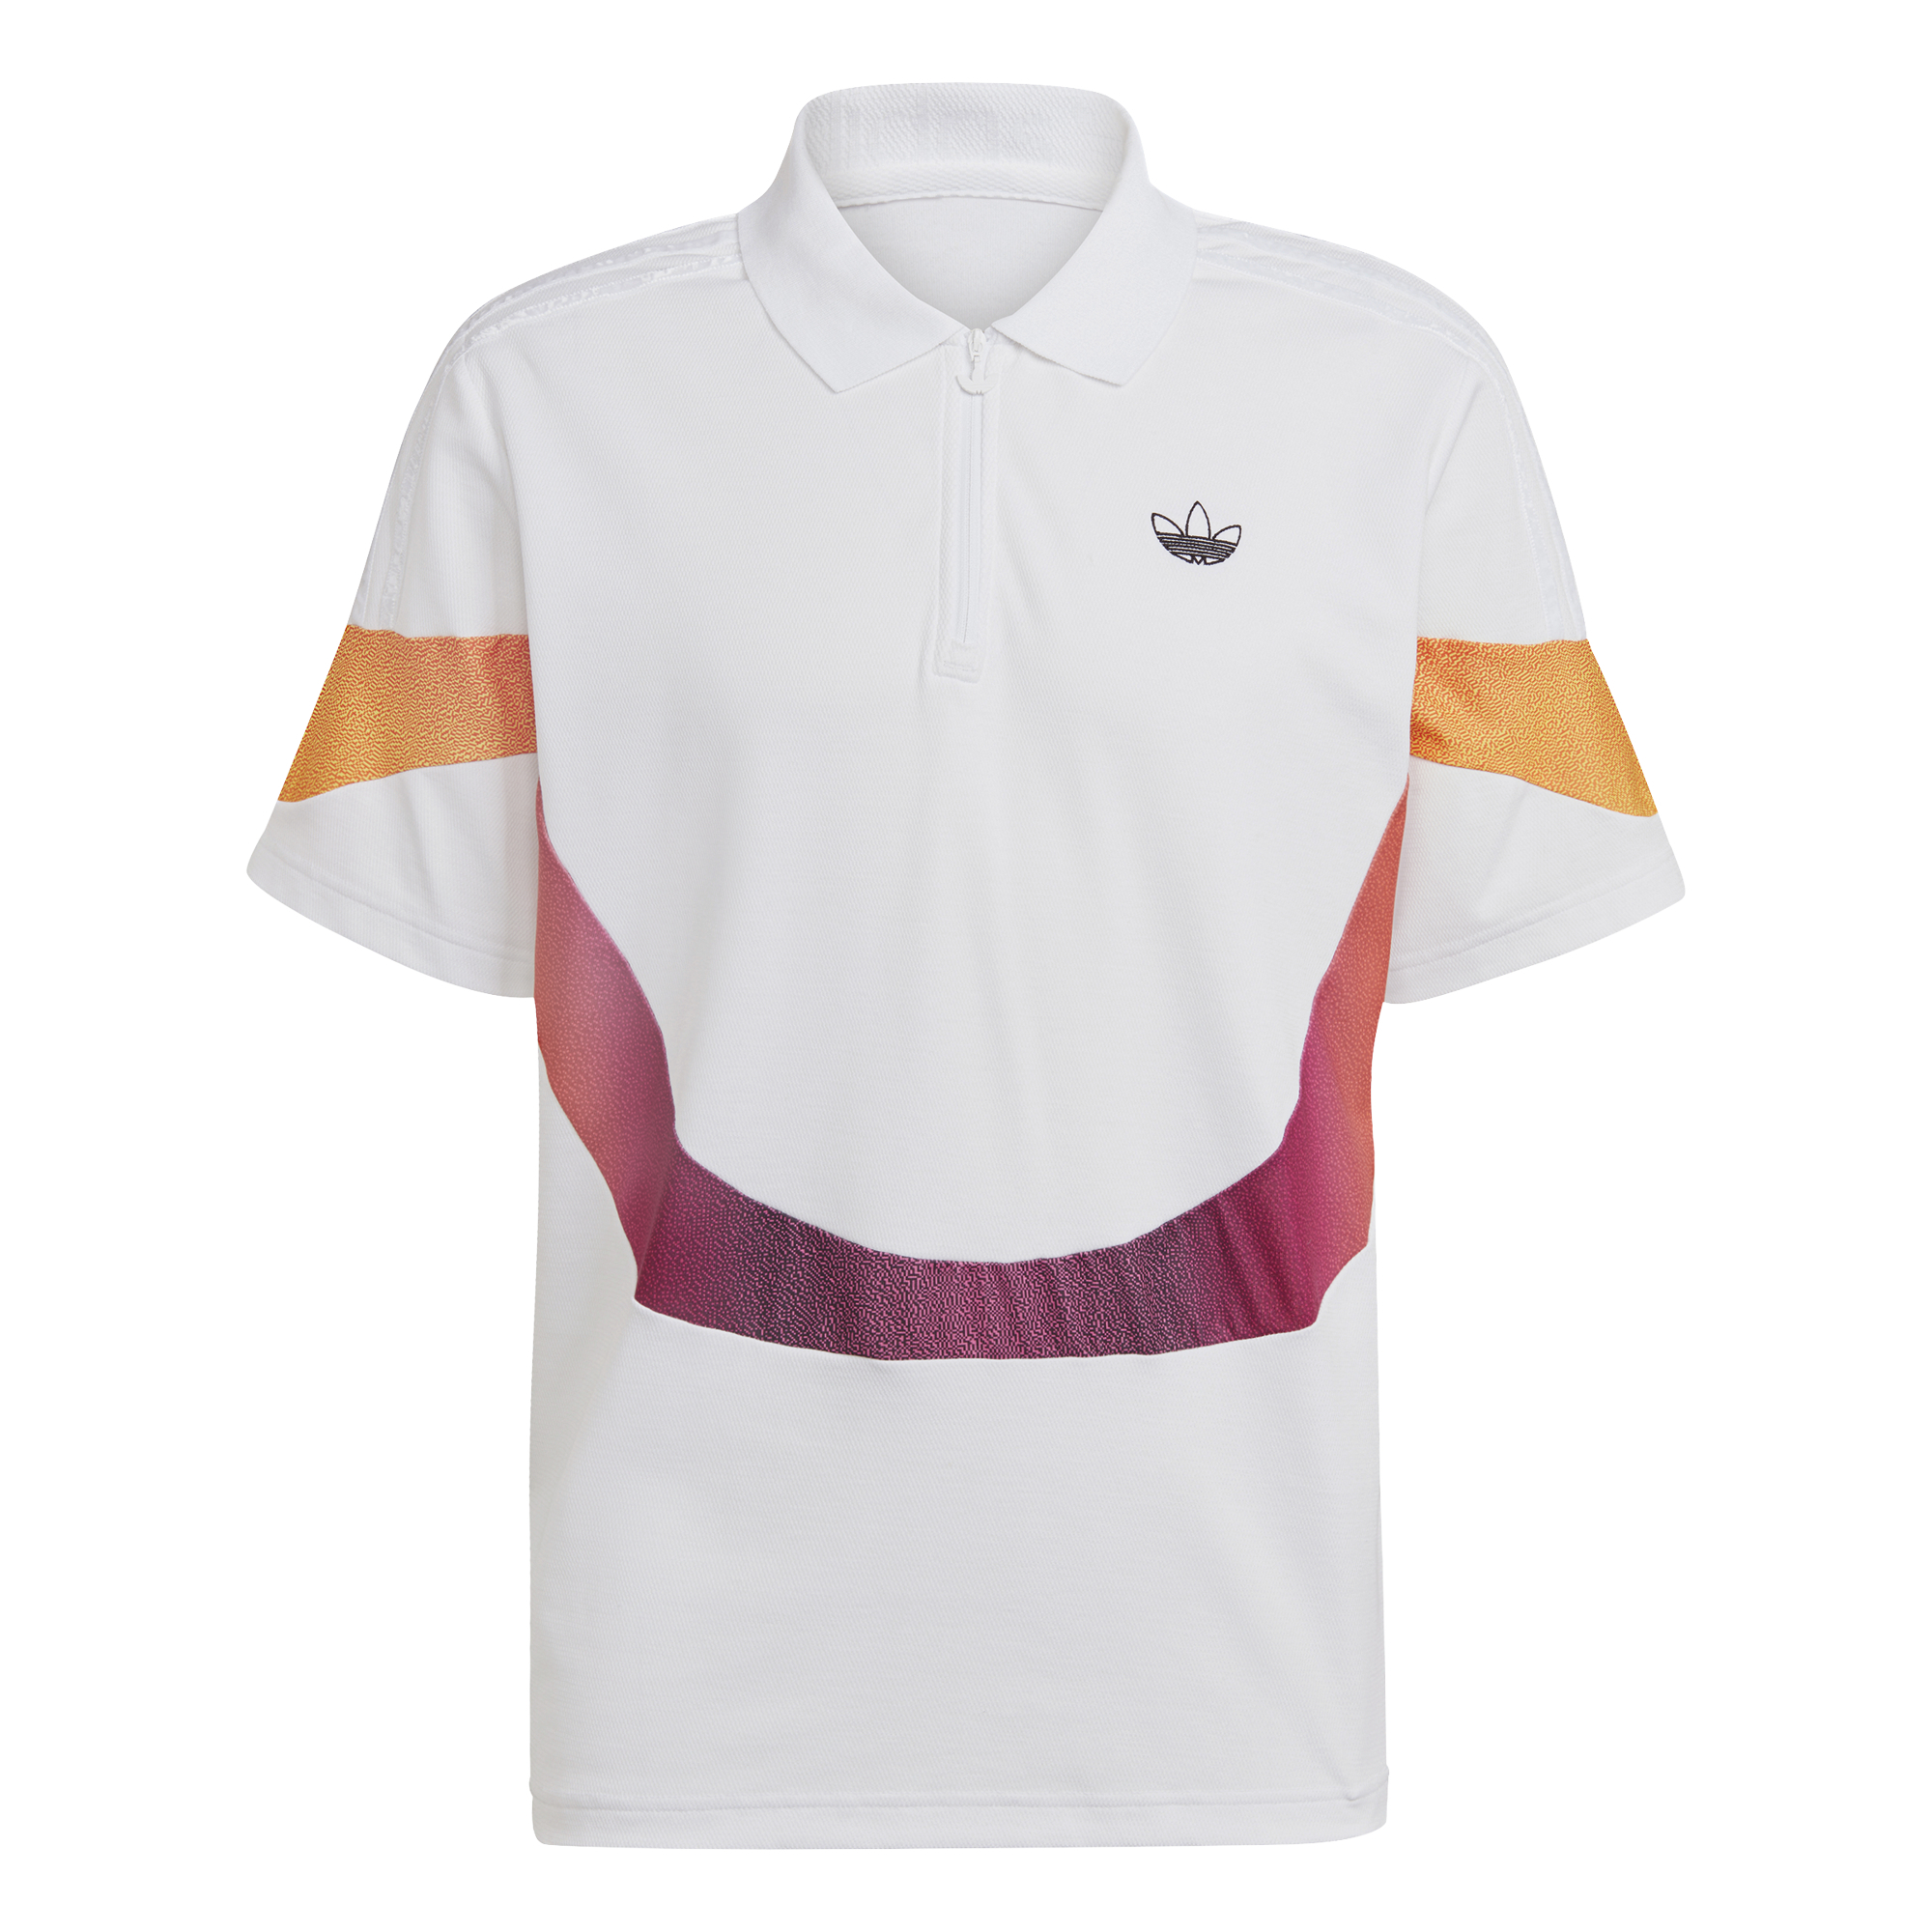 Shopping Kuwait | Adidas, Nike, Puma & More | Free Delivery | Easy Exchange & Returns | SNKR ADIDAS MEN'S SPRT SUPERSPORT POLO SHIRT